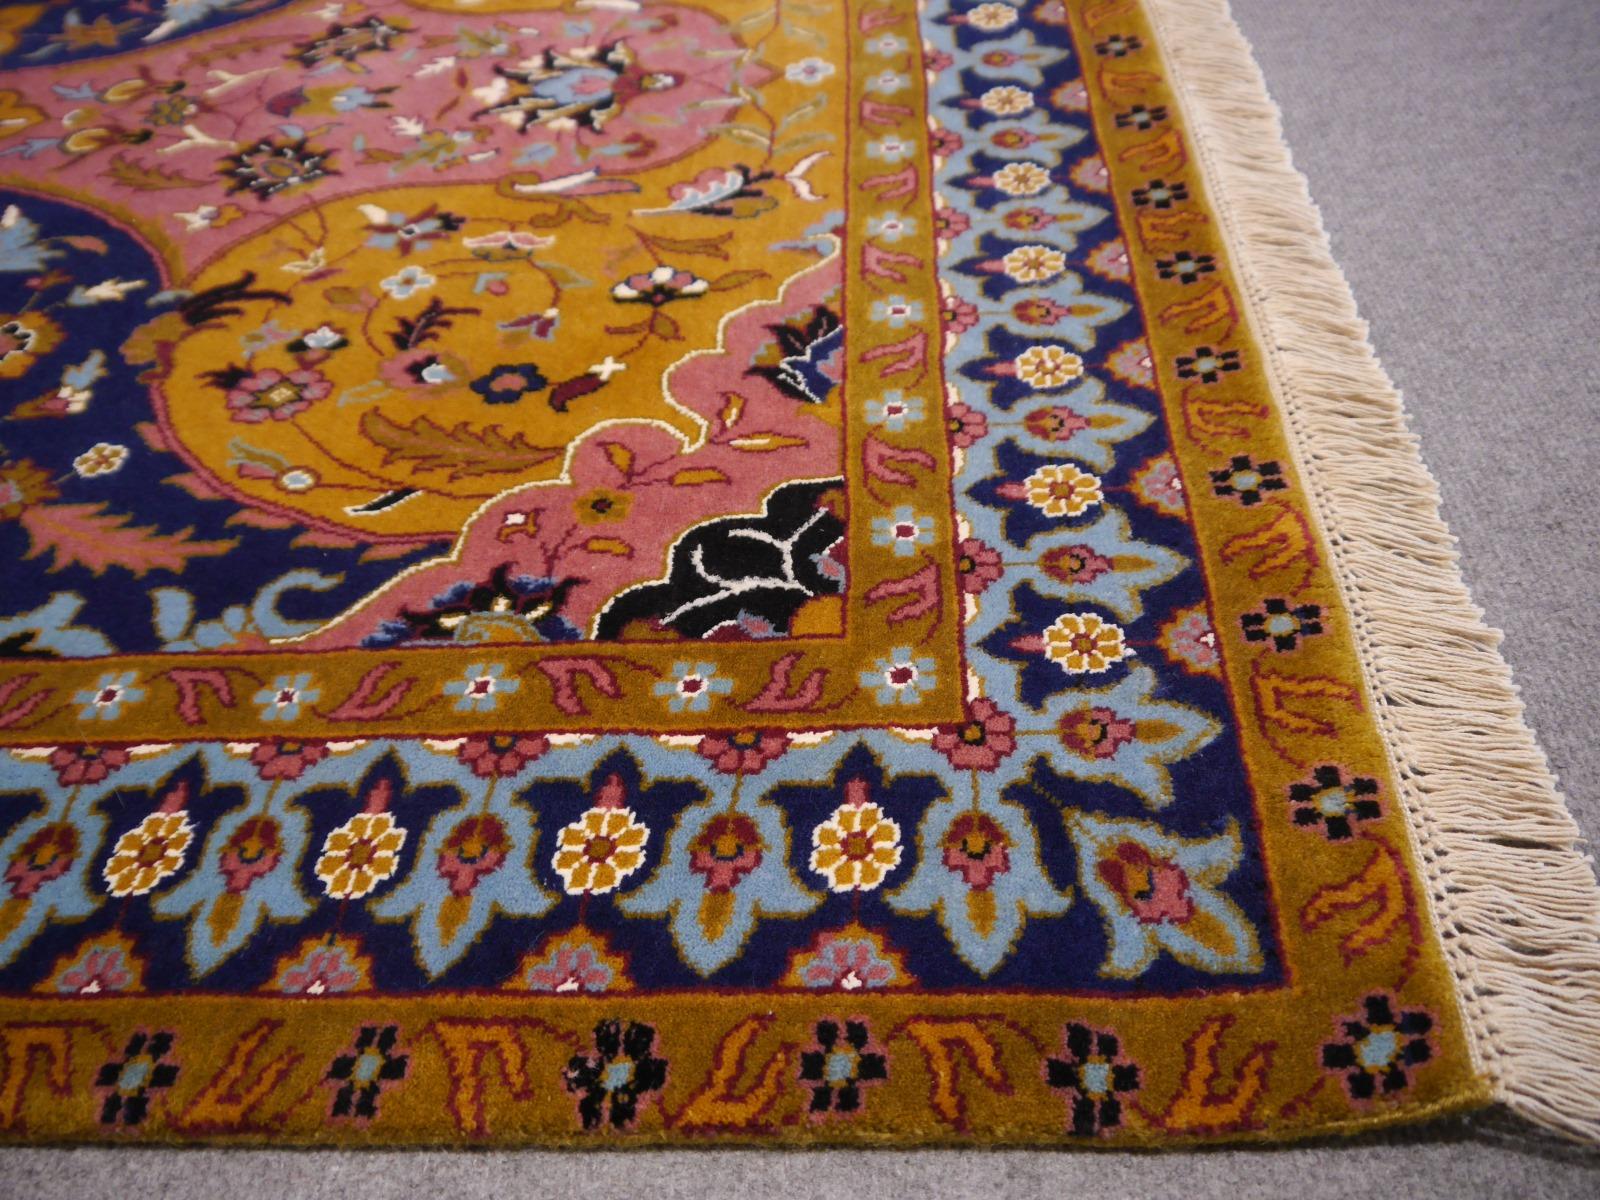 PETAG TABRIZ Design Indian Hand-Knotted Rug In Excellent Condition For Sale In Lohr, Bavaria, DE